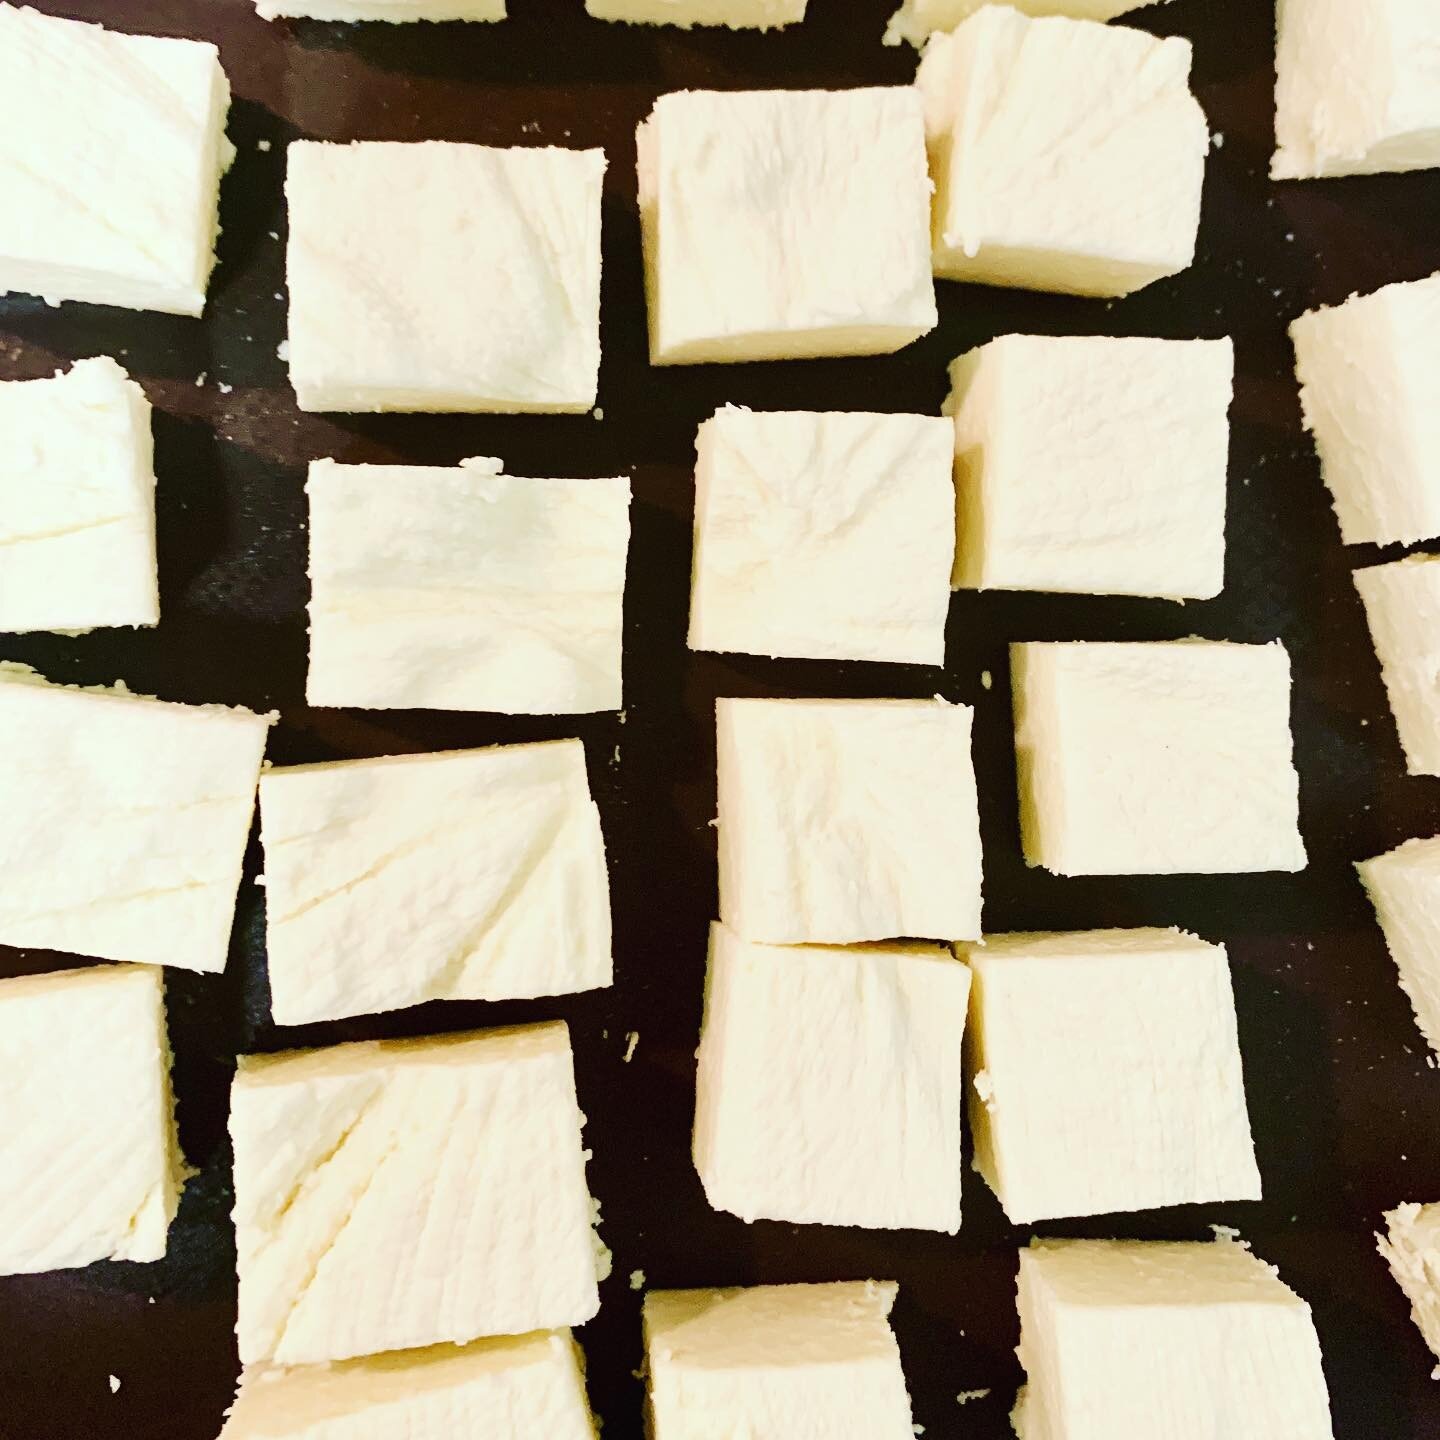 And then, they made cheese! ◽️⚪️◽️⚪️
#paneer #chhena #itsallthehype&nbsp;
&darr; 
Paneer is a solid protein source for all you lactose indulgent vegetarians. It&rsquo;s also easy to make. Recipe below.
&darr; 
PANEER
1 gallon of whole cow or goat mil